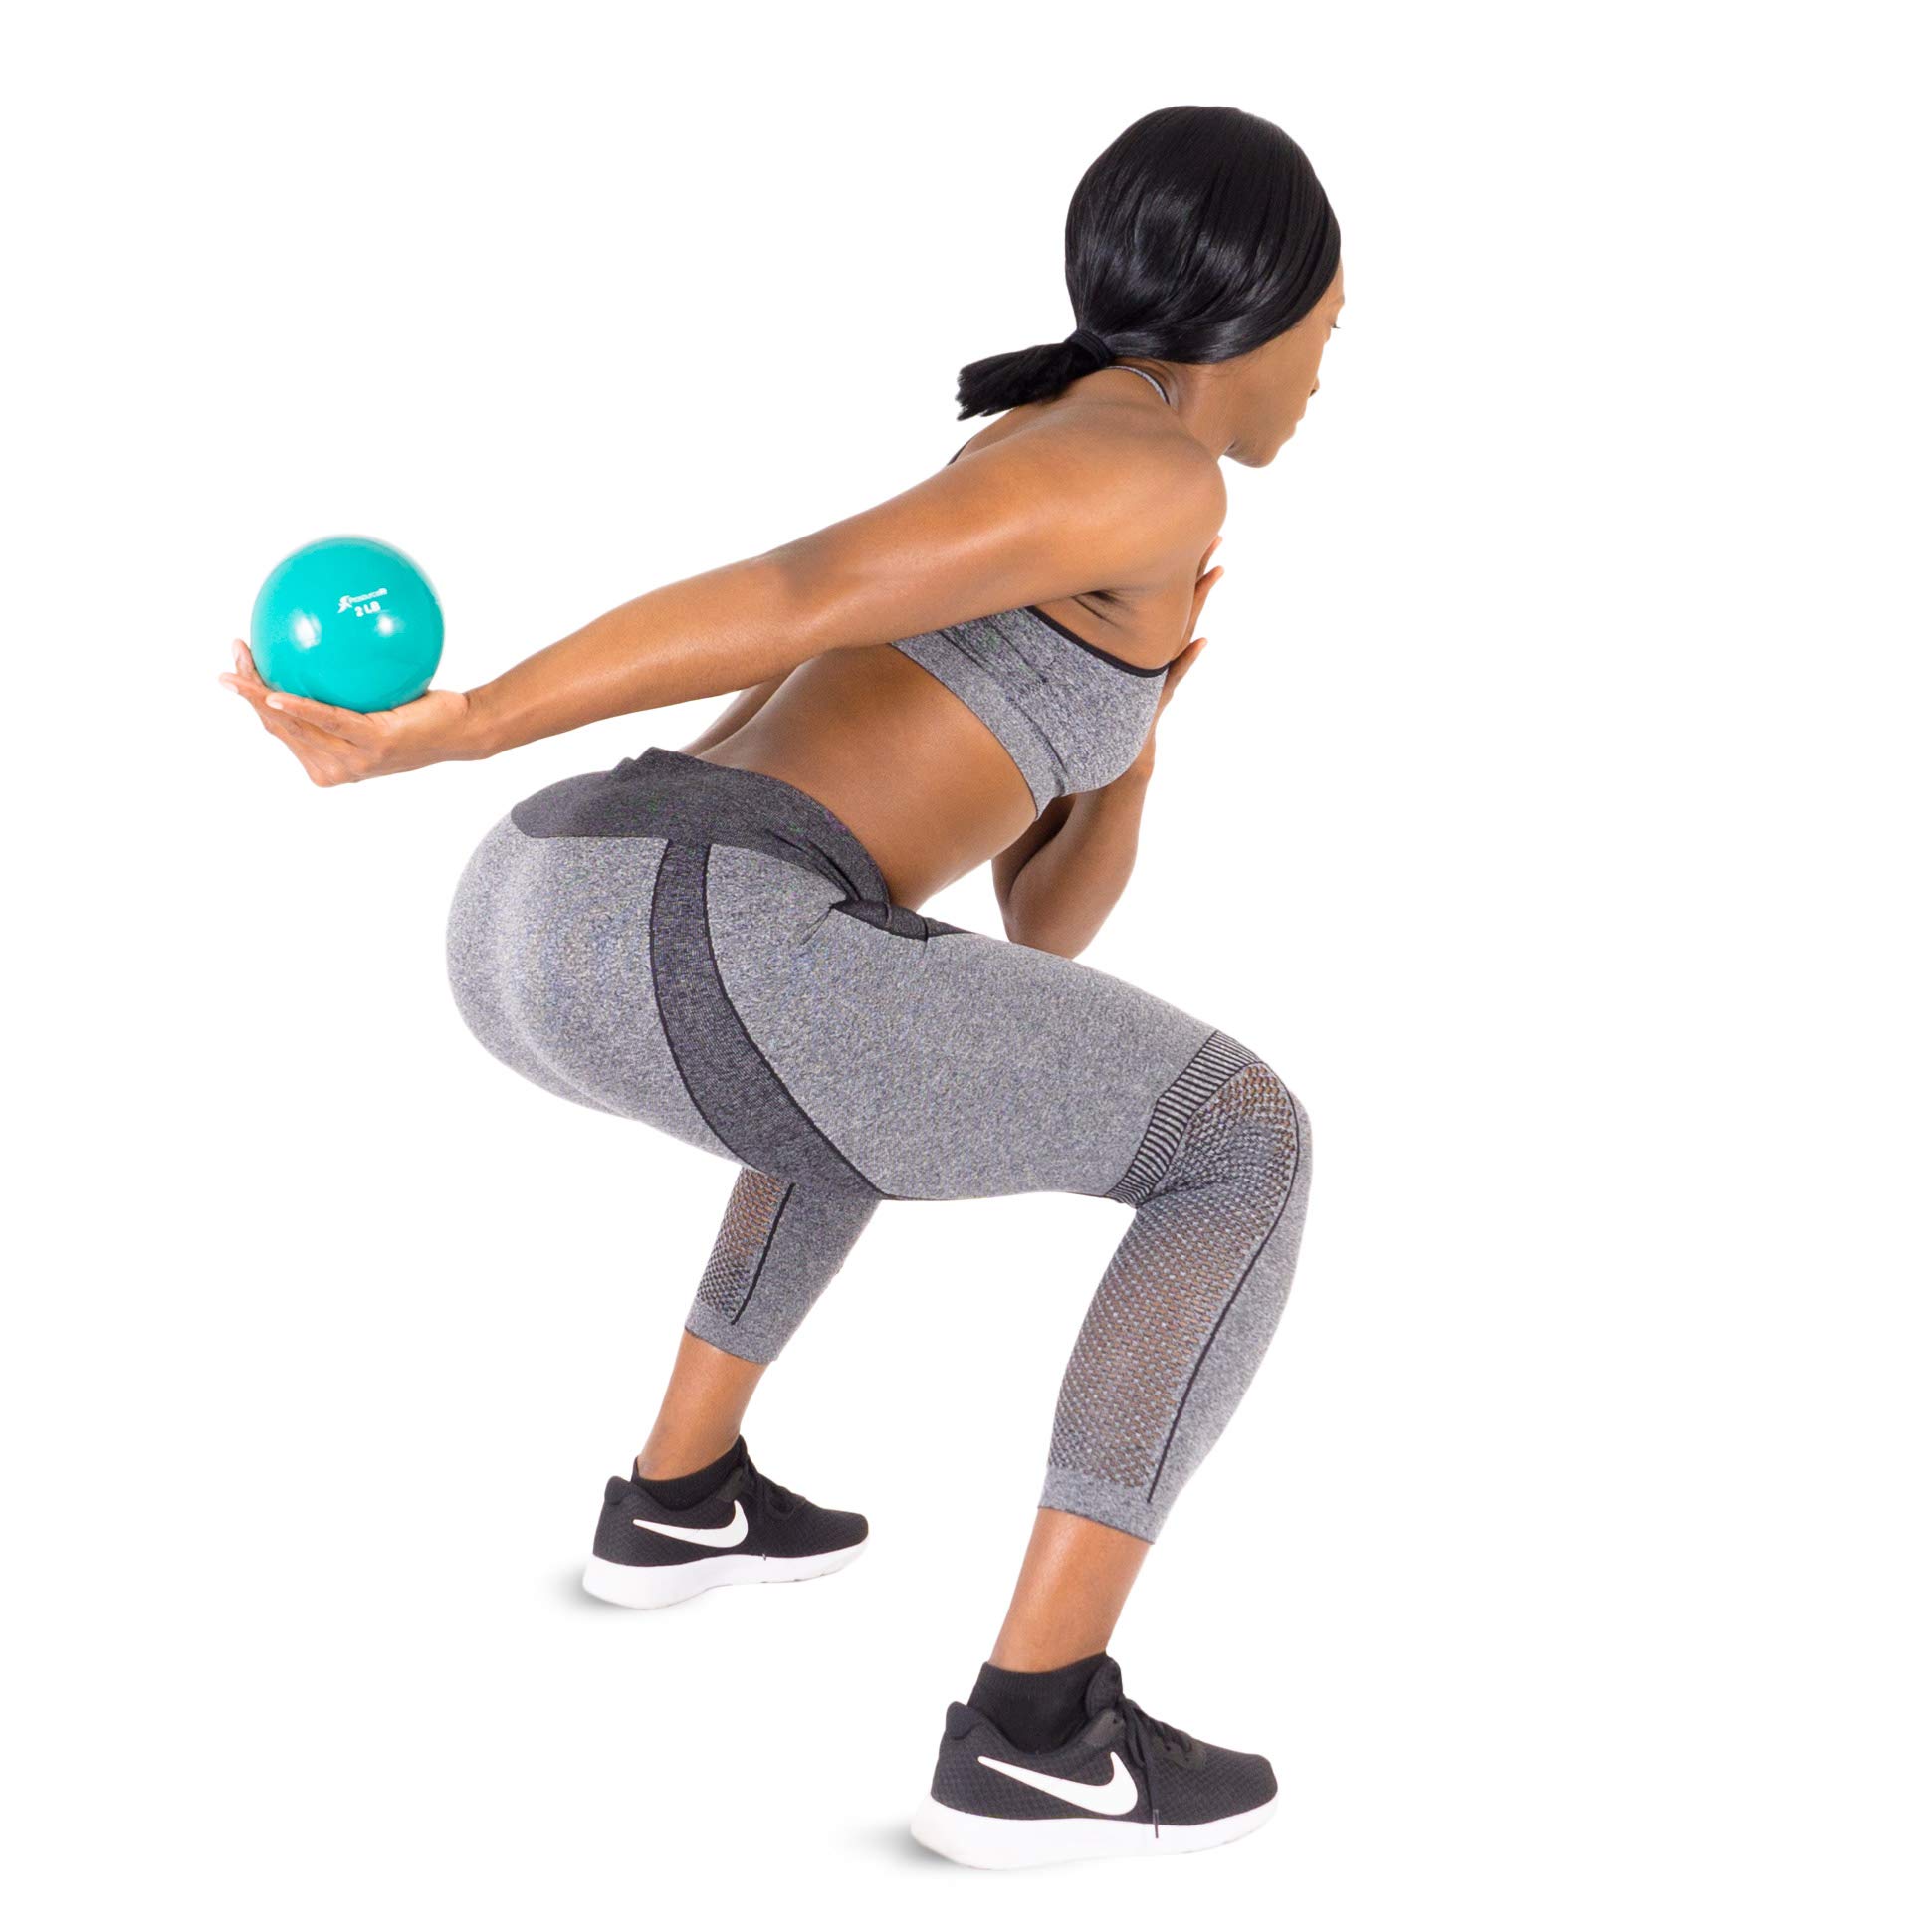 ProsourceFit Weighted Toning Exercise Balls for Pilates